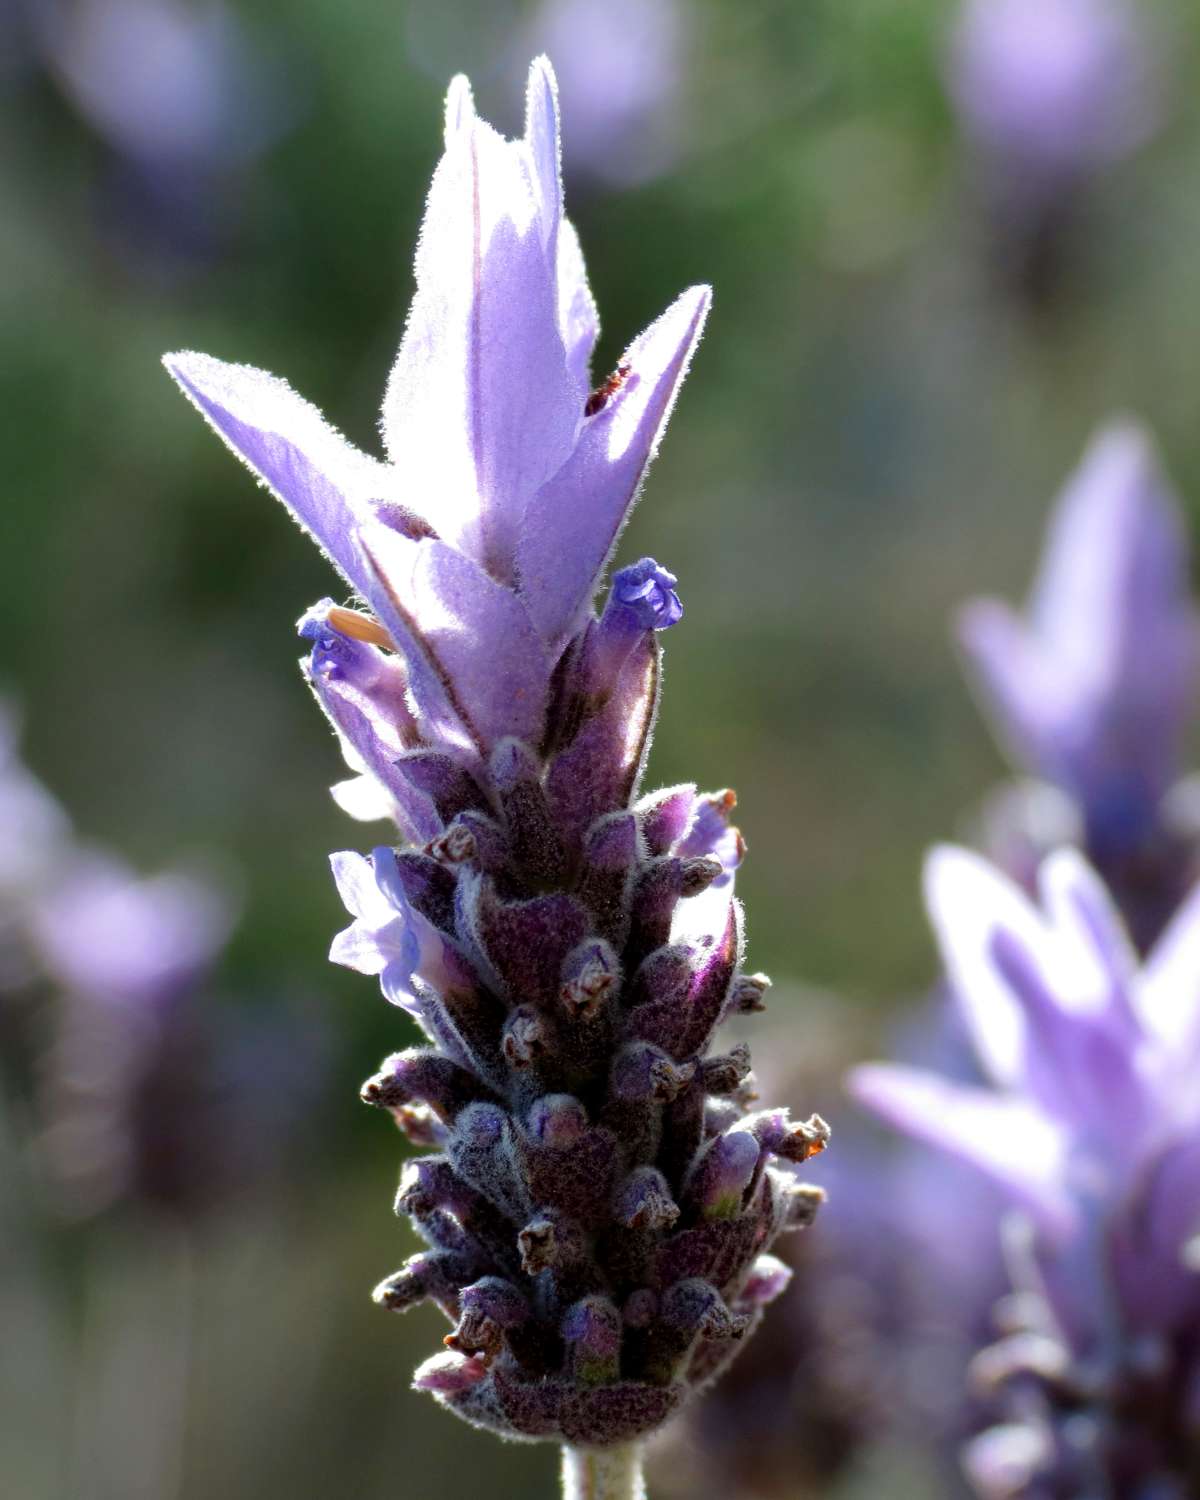 How to Grow and Care for French Lavender